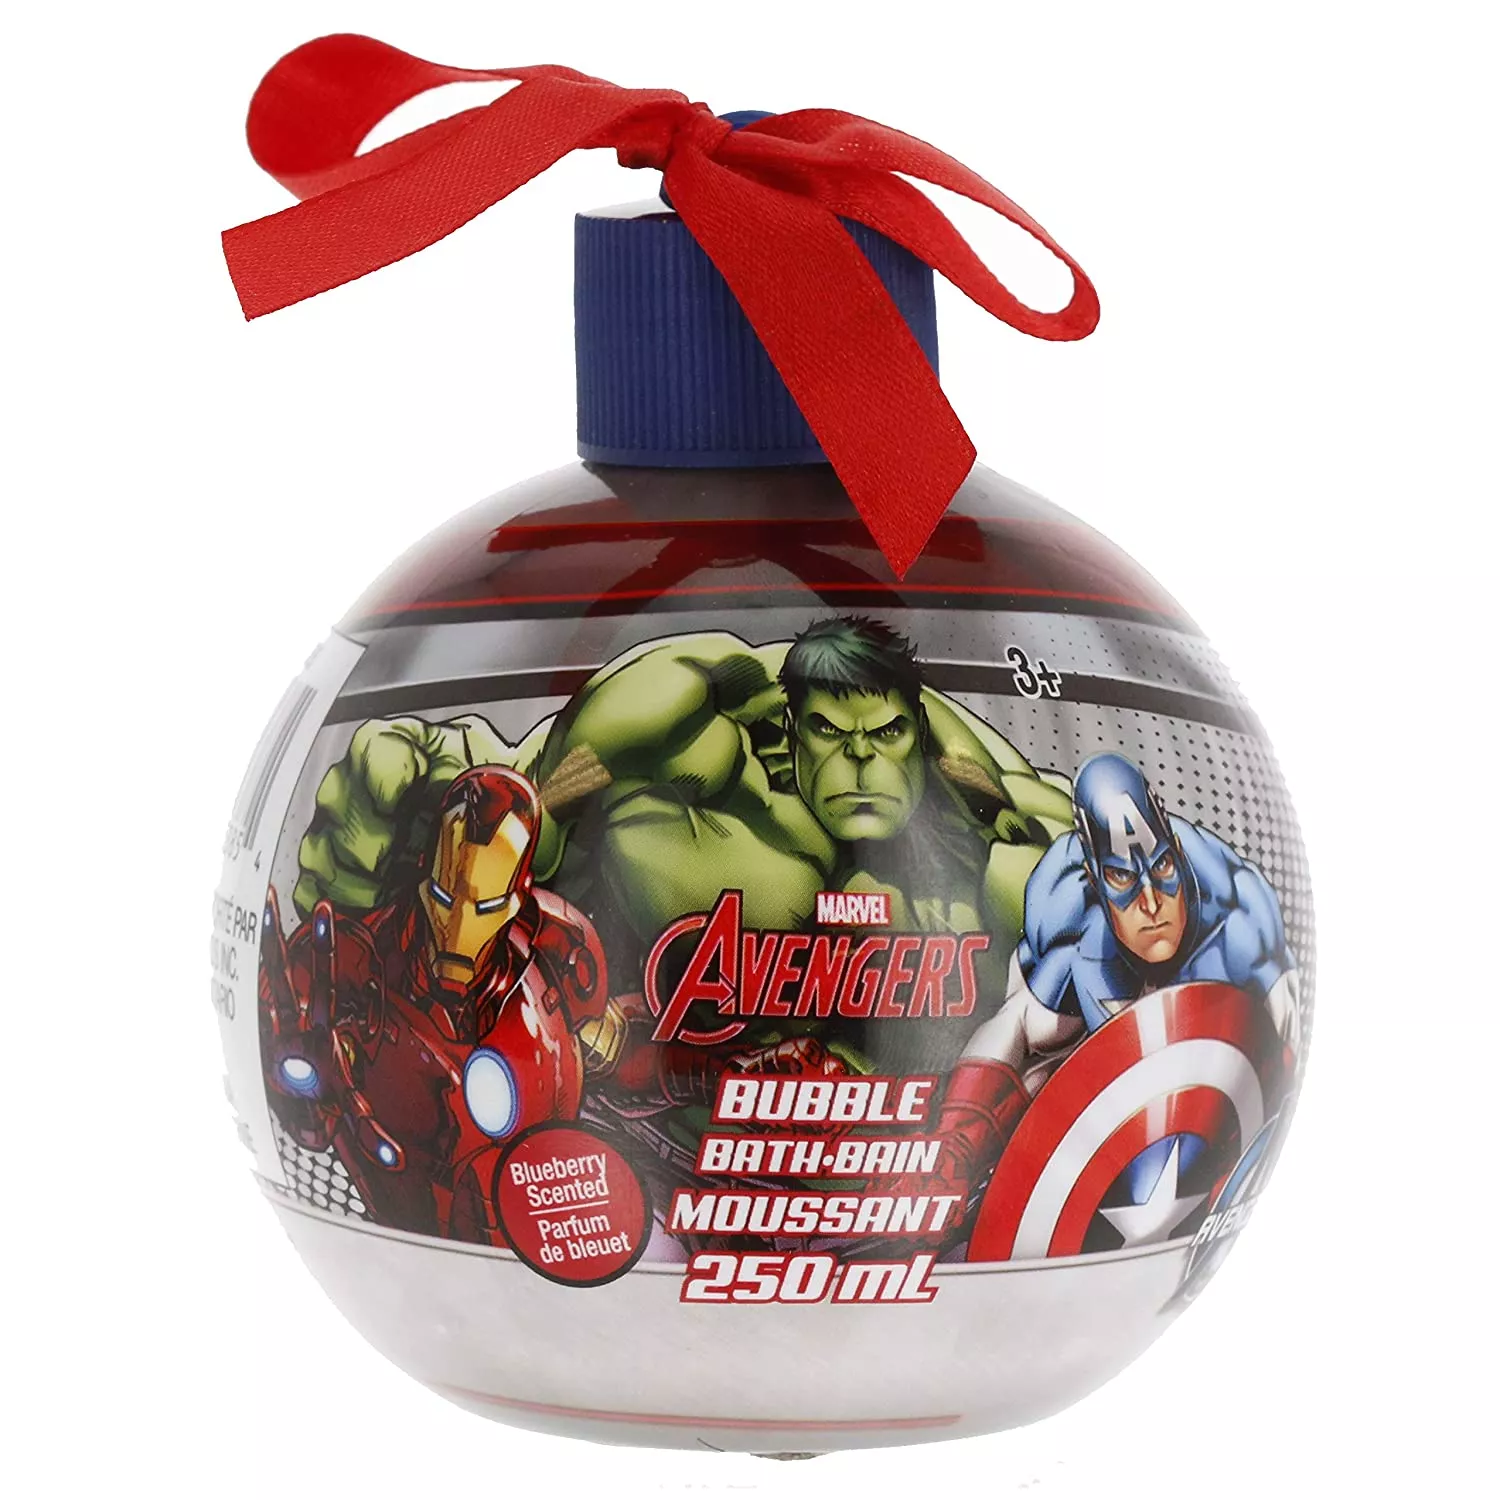 Avengers Bubble Bath gifts for her gifts for marvel fans